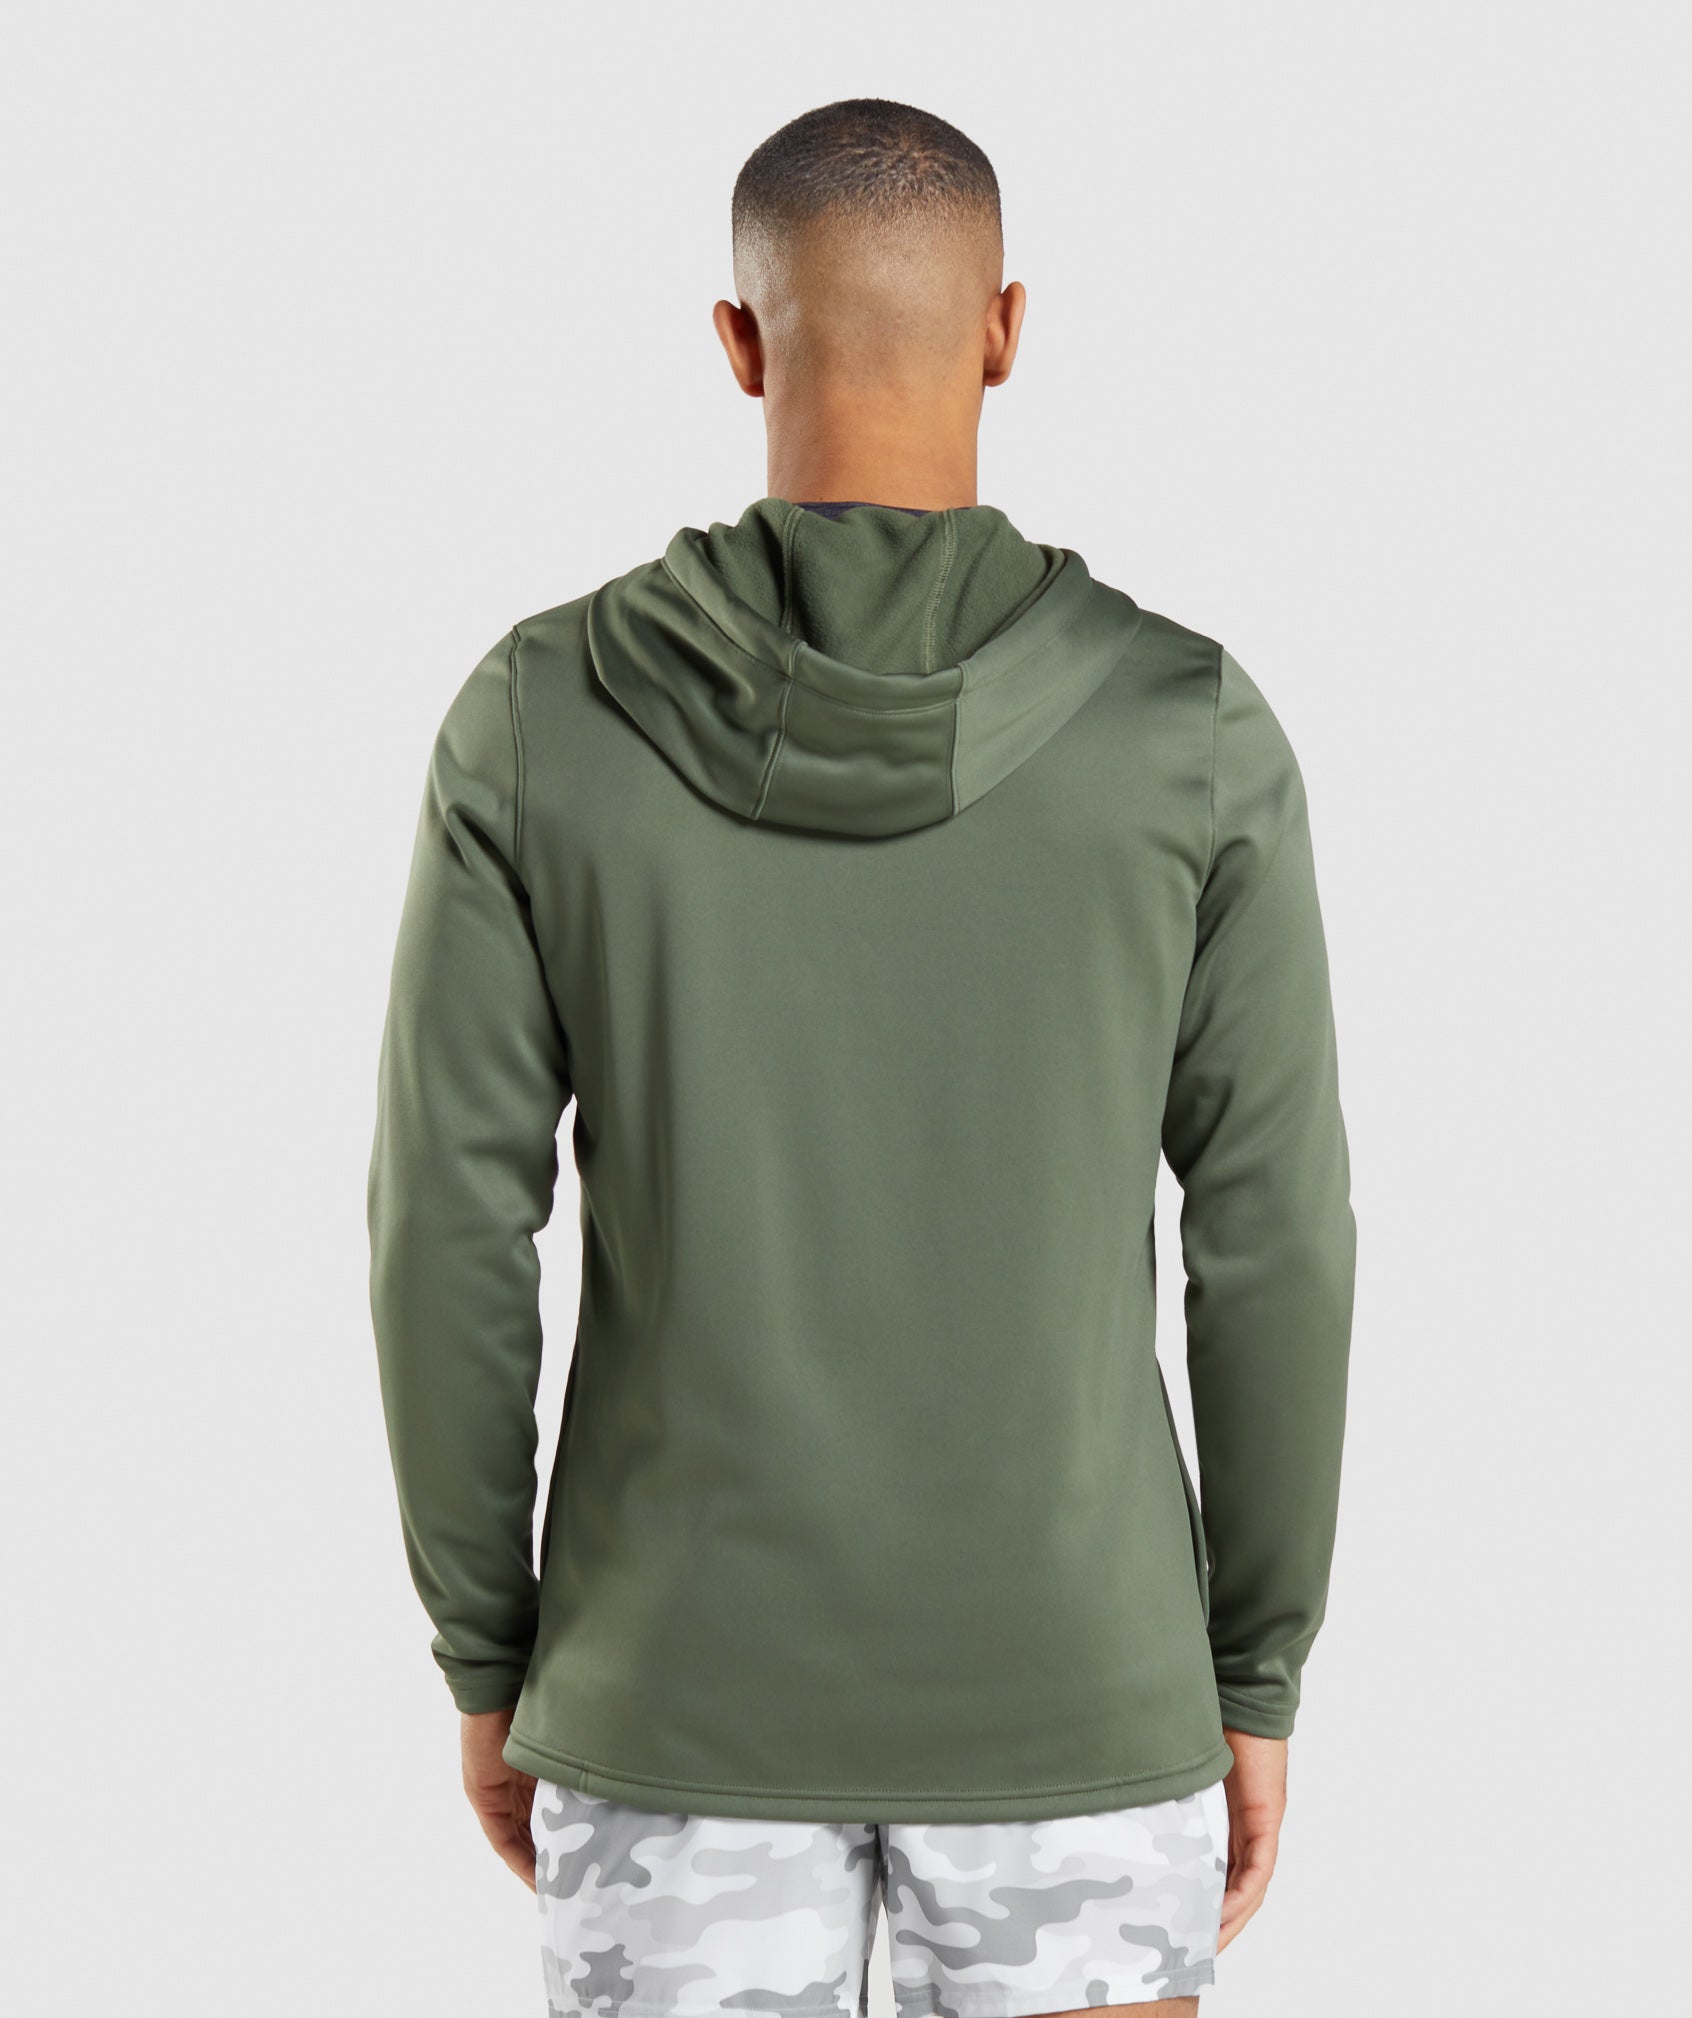 Arrival Zip Up Hoodie in Core Olive - view 2